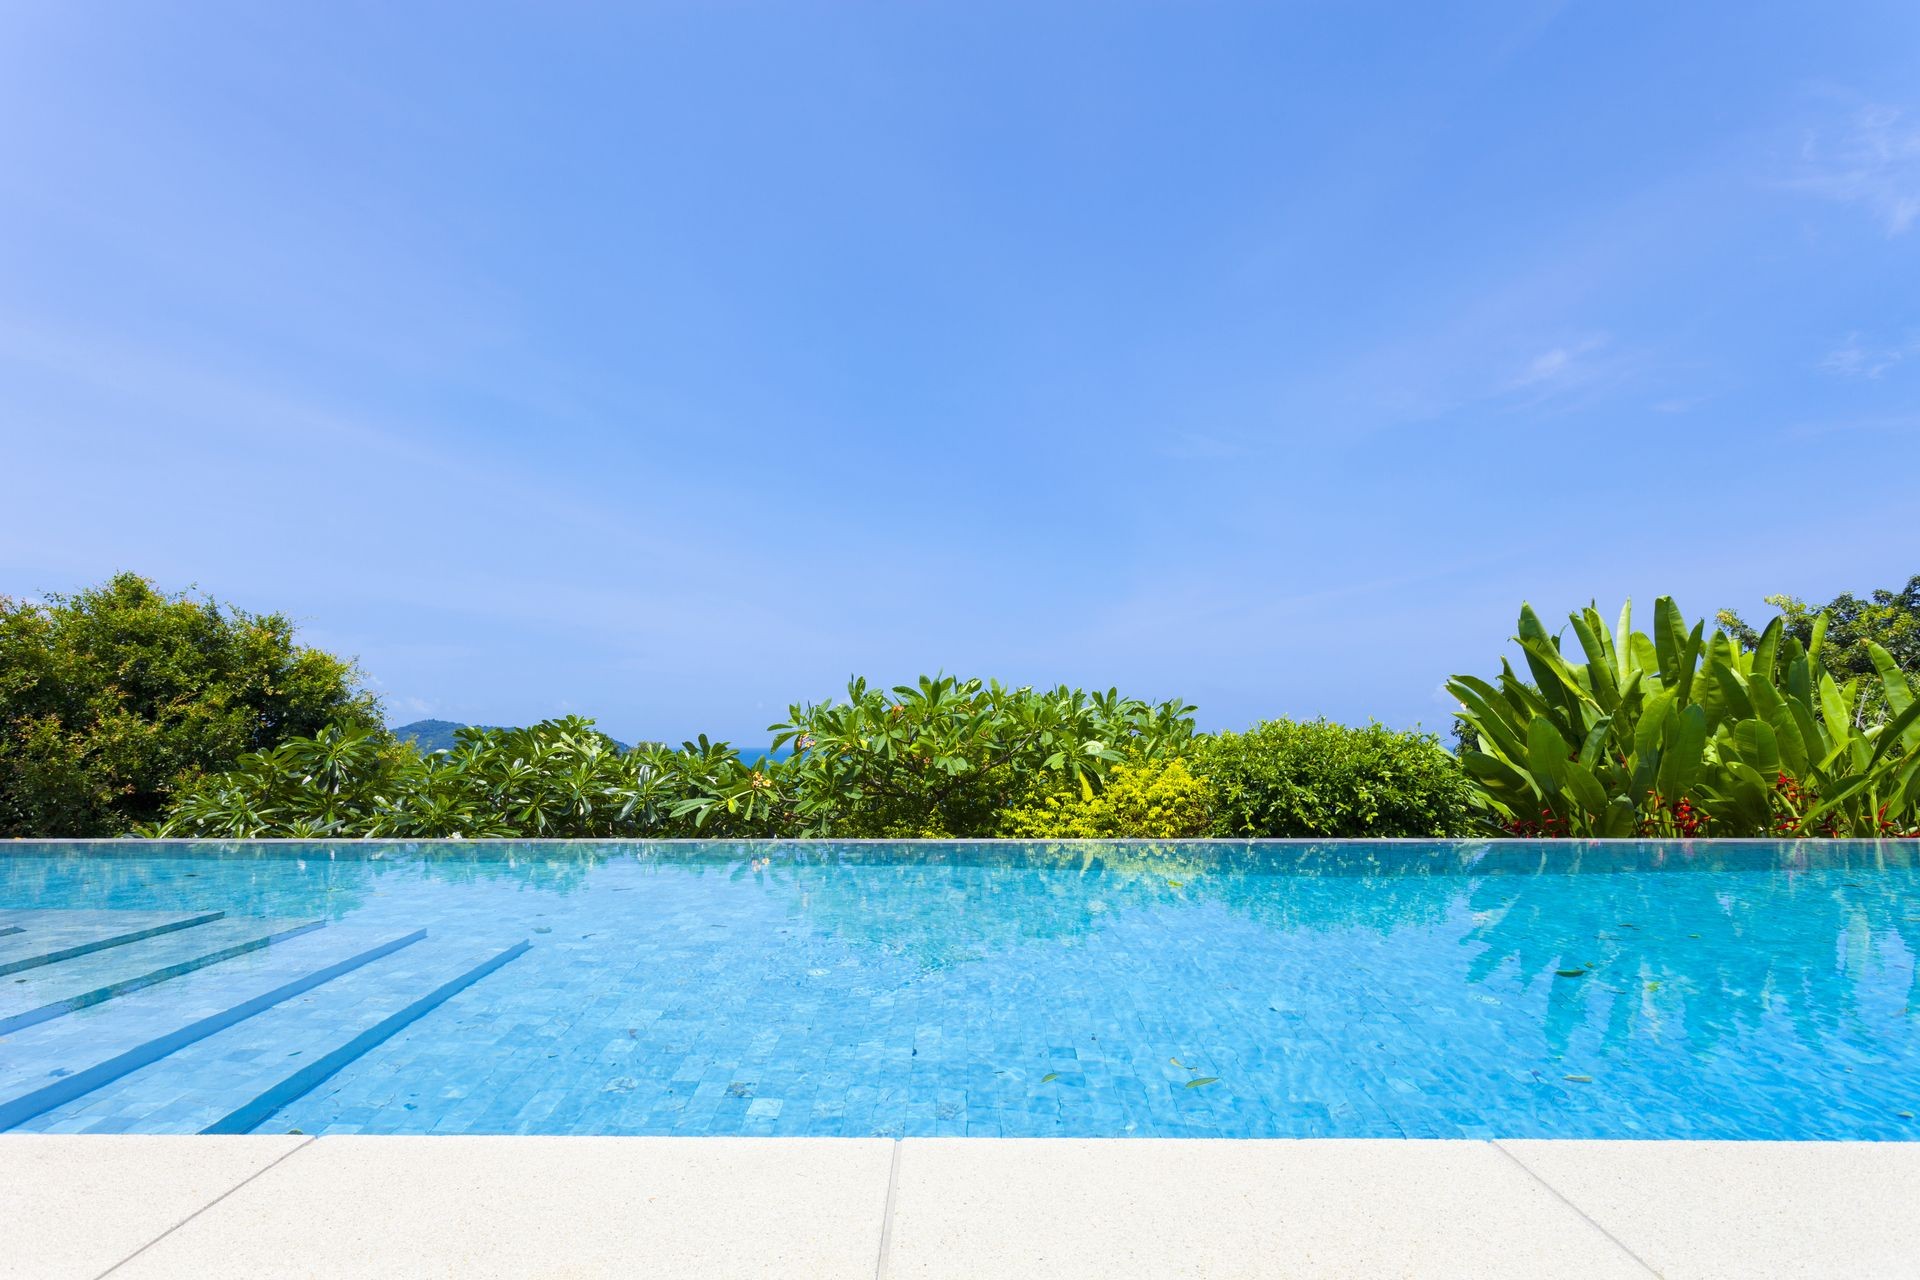 Swimming pool overlooking view andaman sea mountains and blue sky background,summer holiday background concept